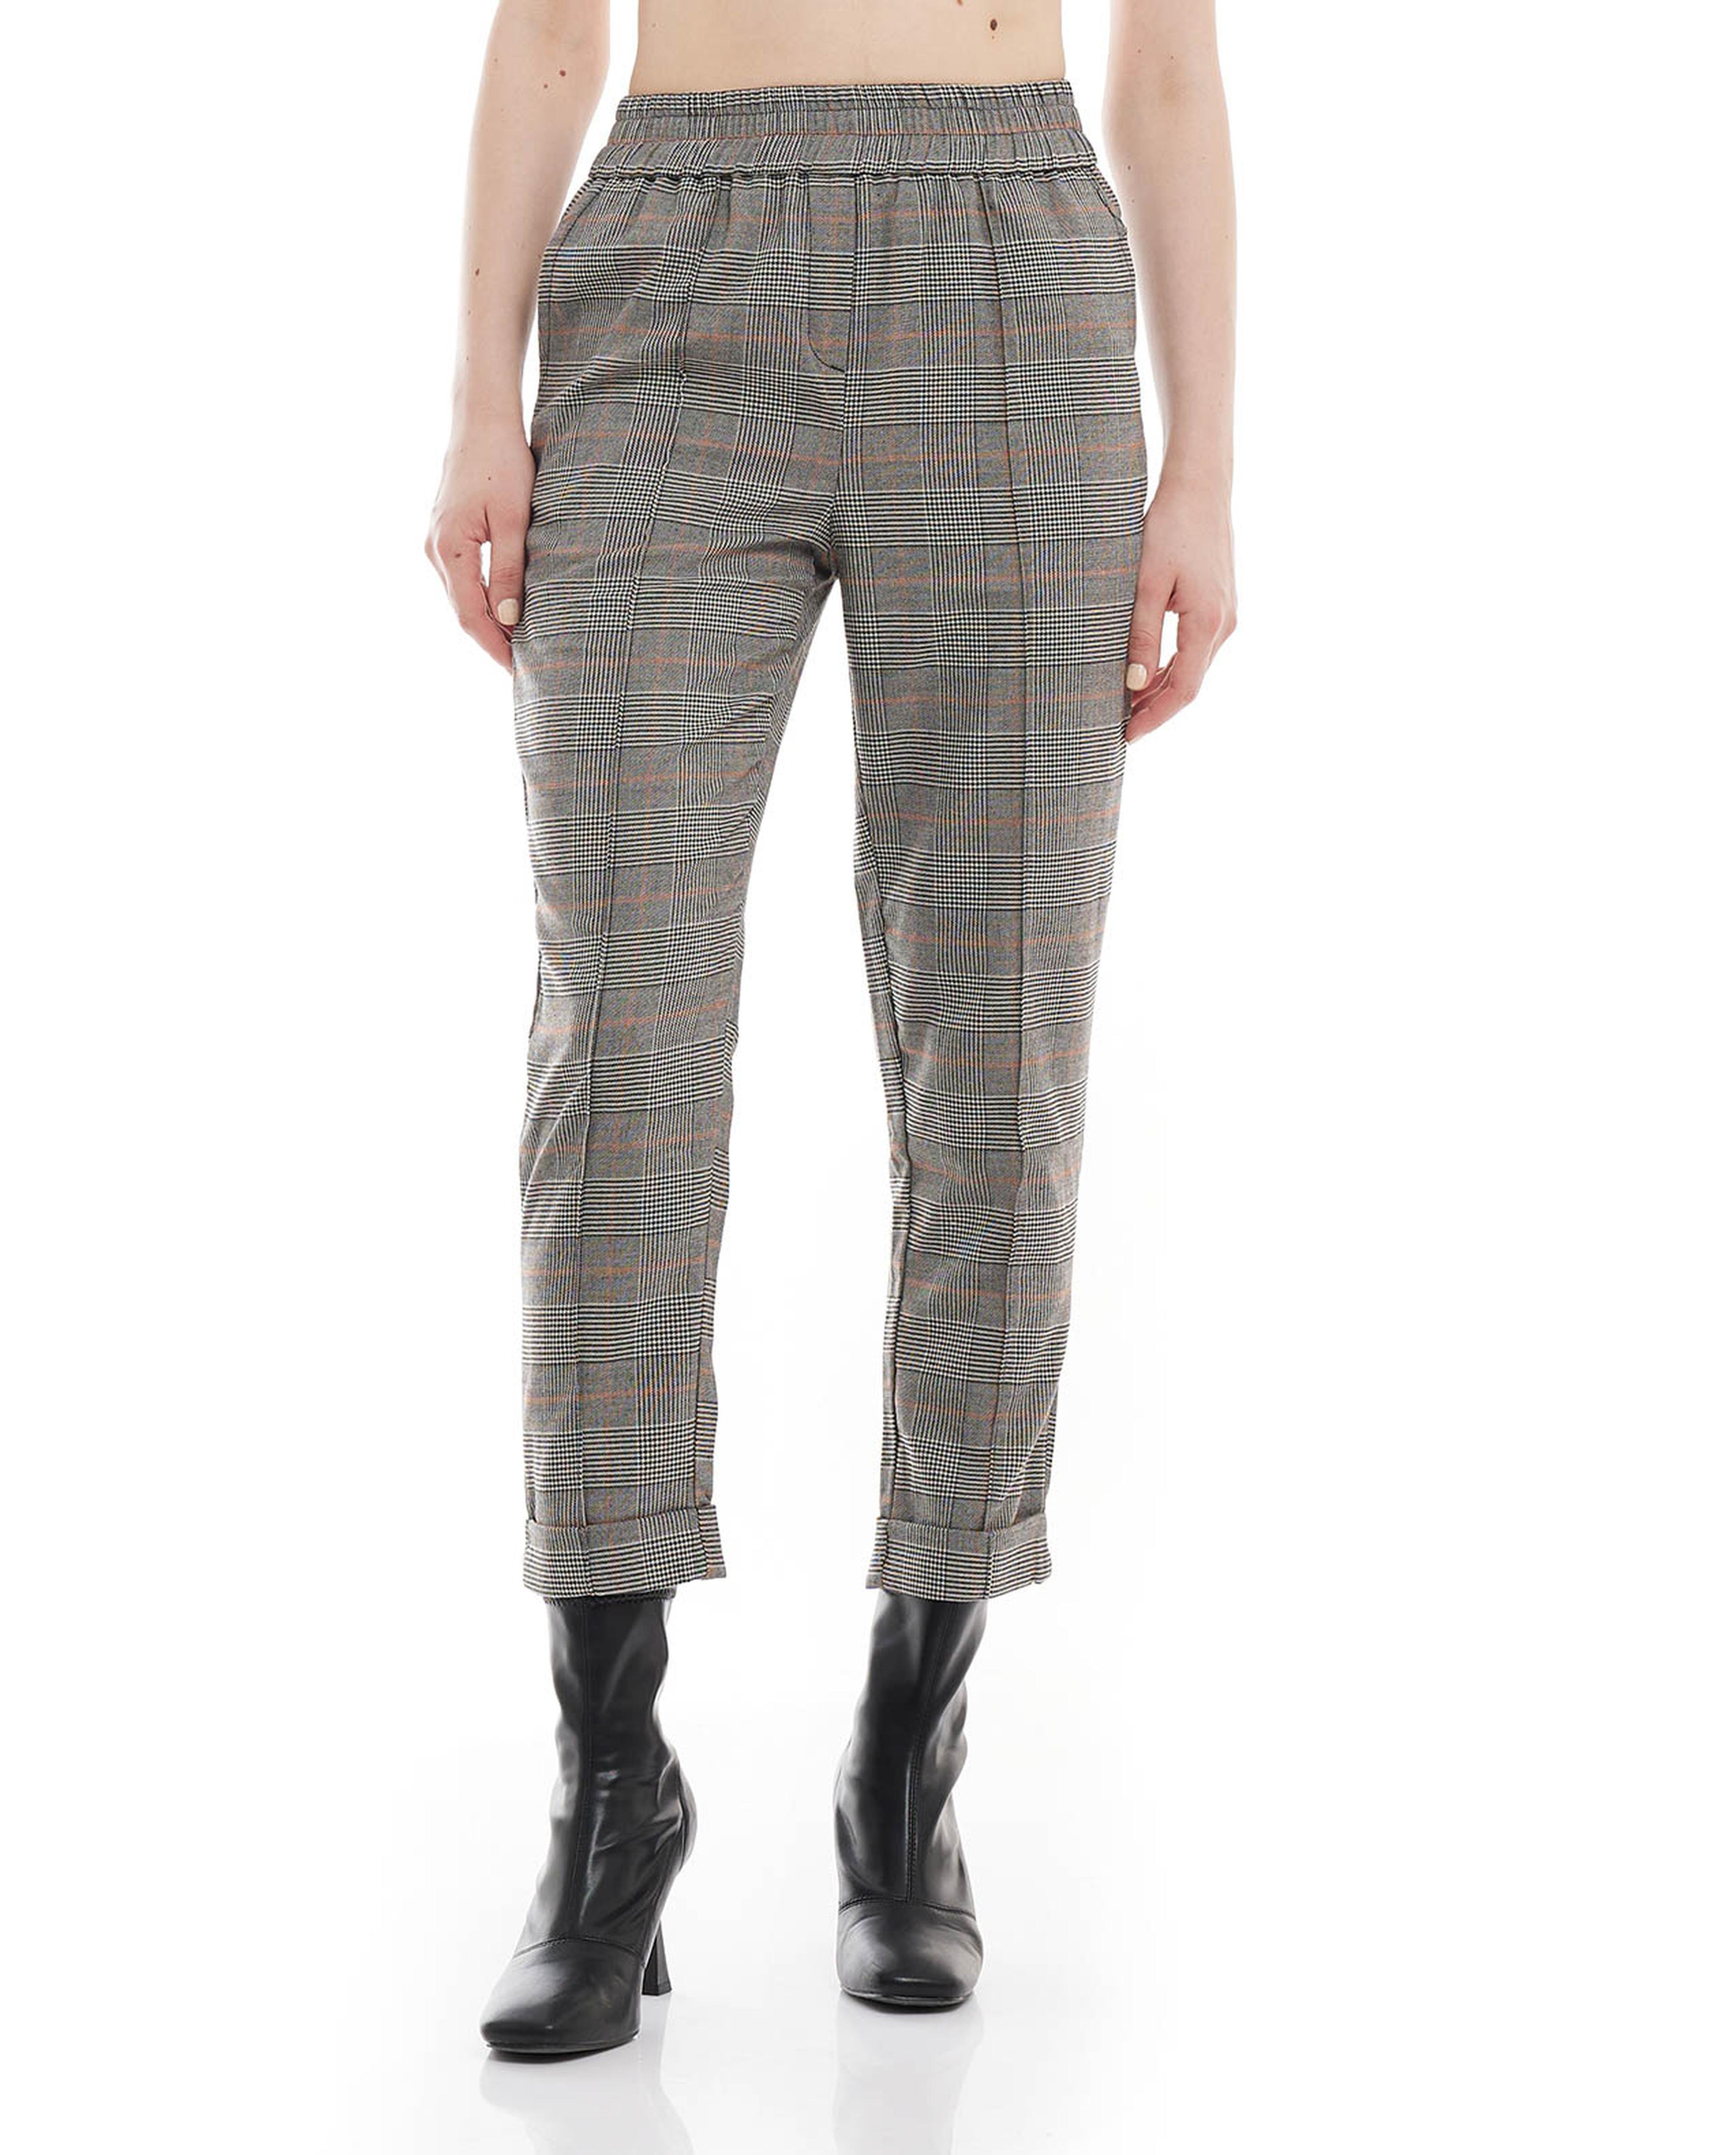 Plaid Tapered Pants with Elastic Waist